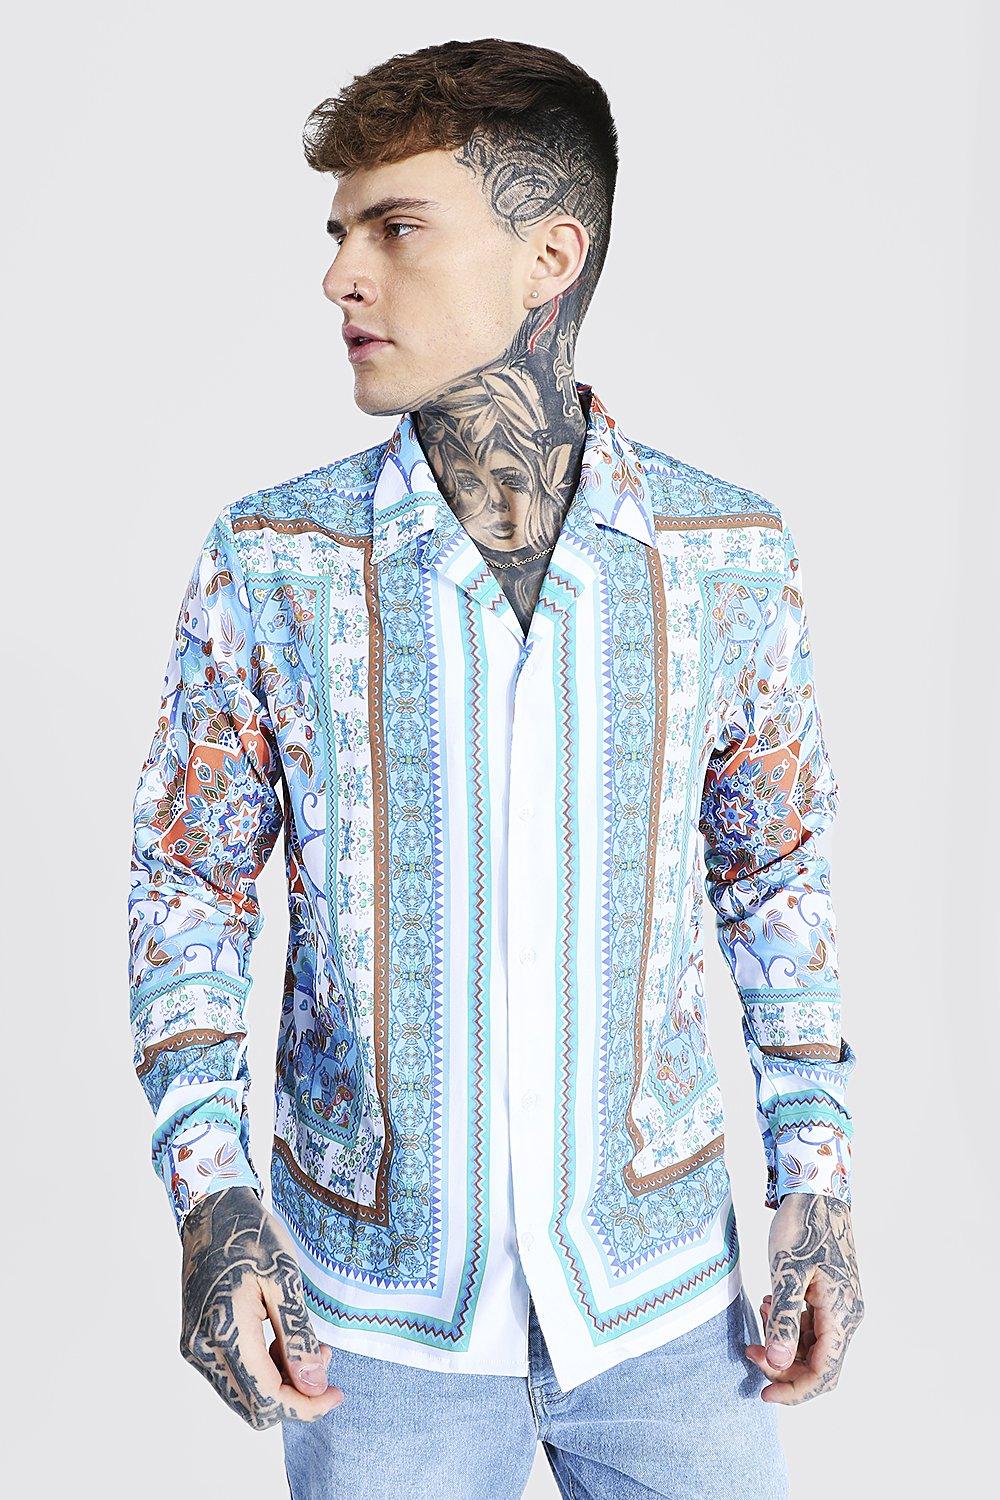 Recycle Mediator to withdraw Long Sleeve Revere Baroque Border Shirt | boohooMAN USA